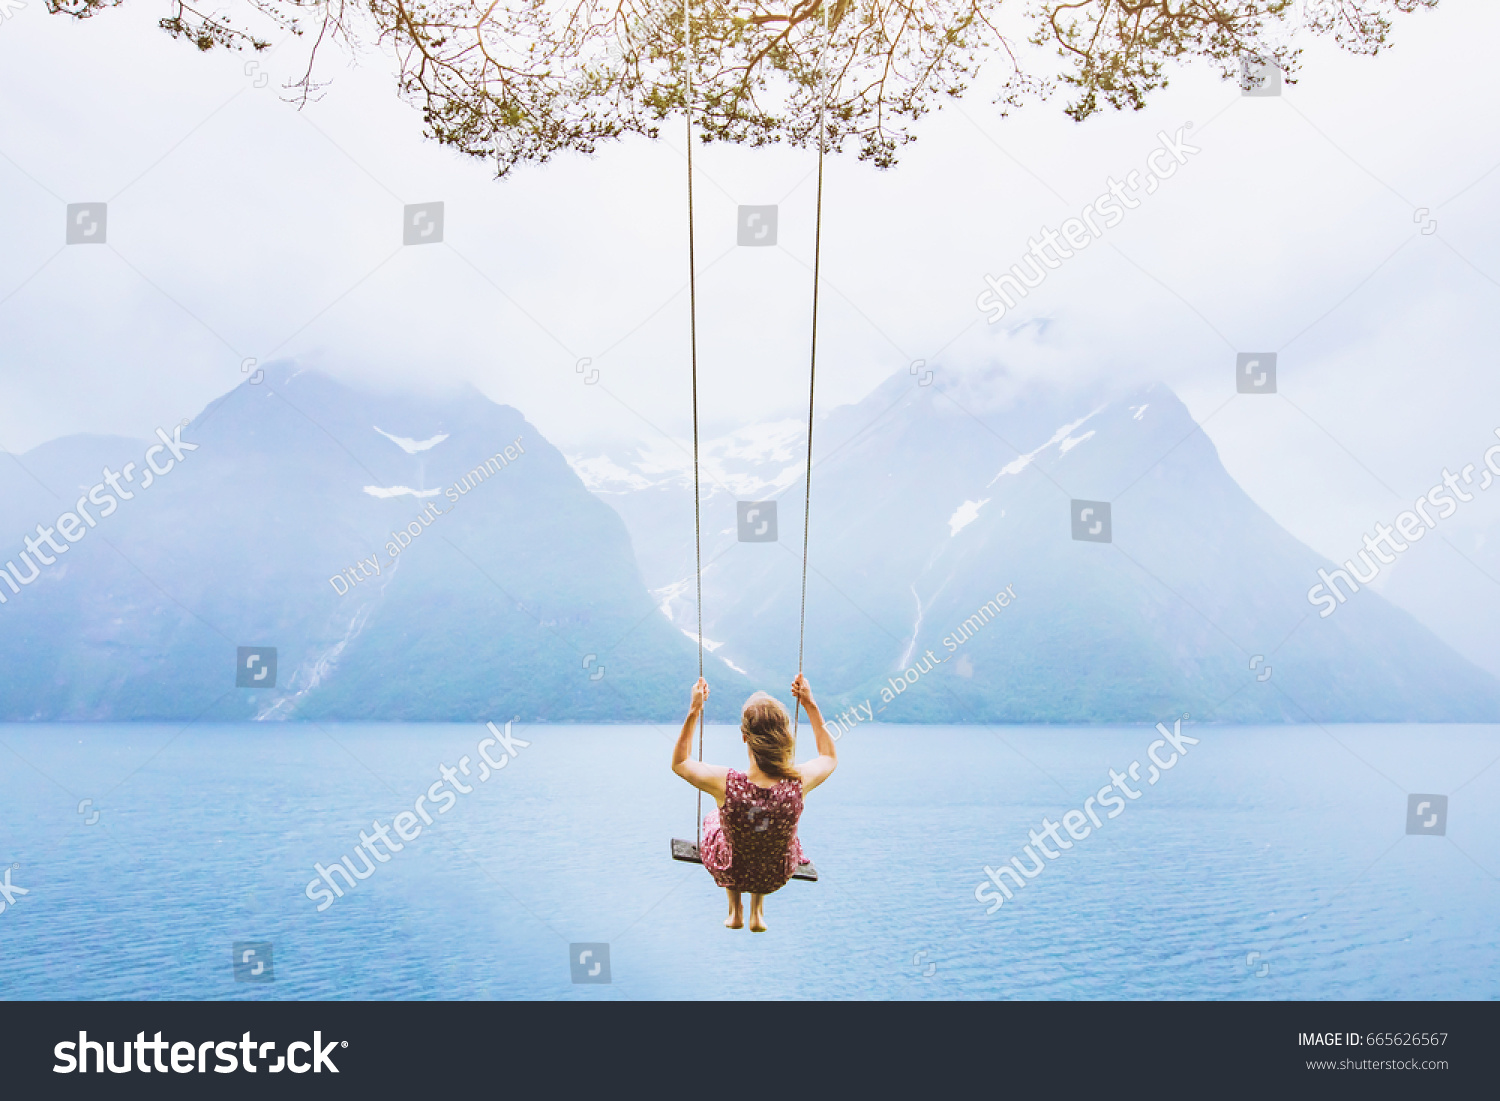 dream concept, beautiful young woman on the swing in fjord Norway, inspiring landscape #665626567